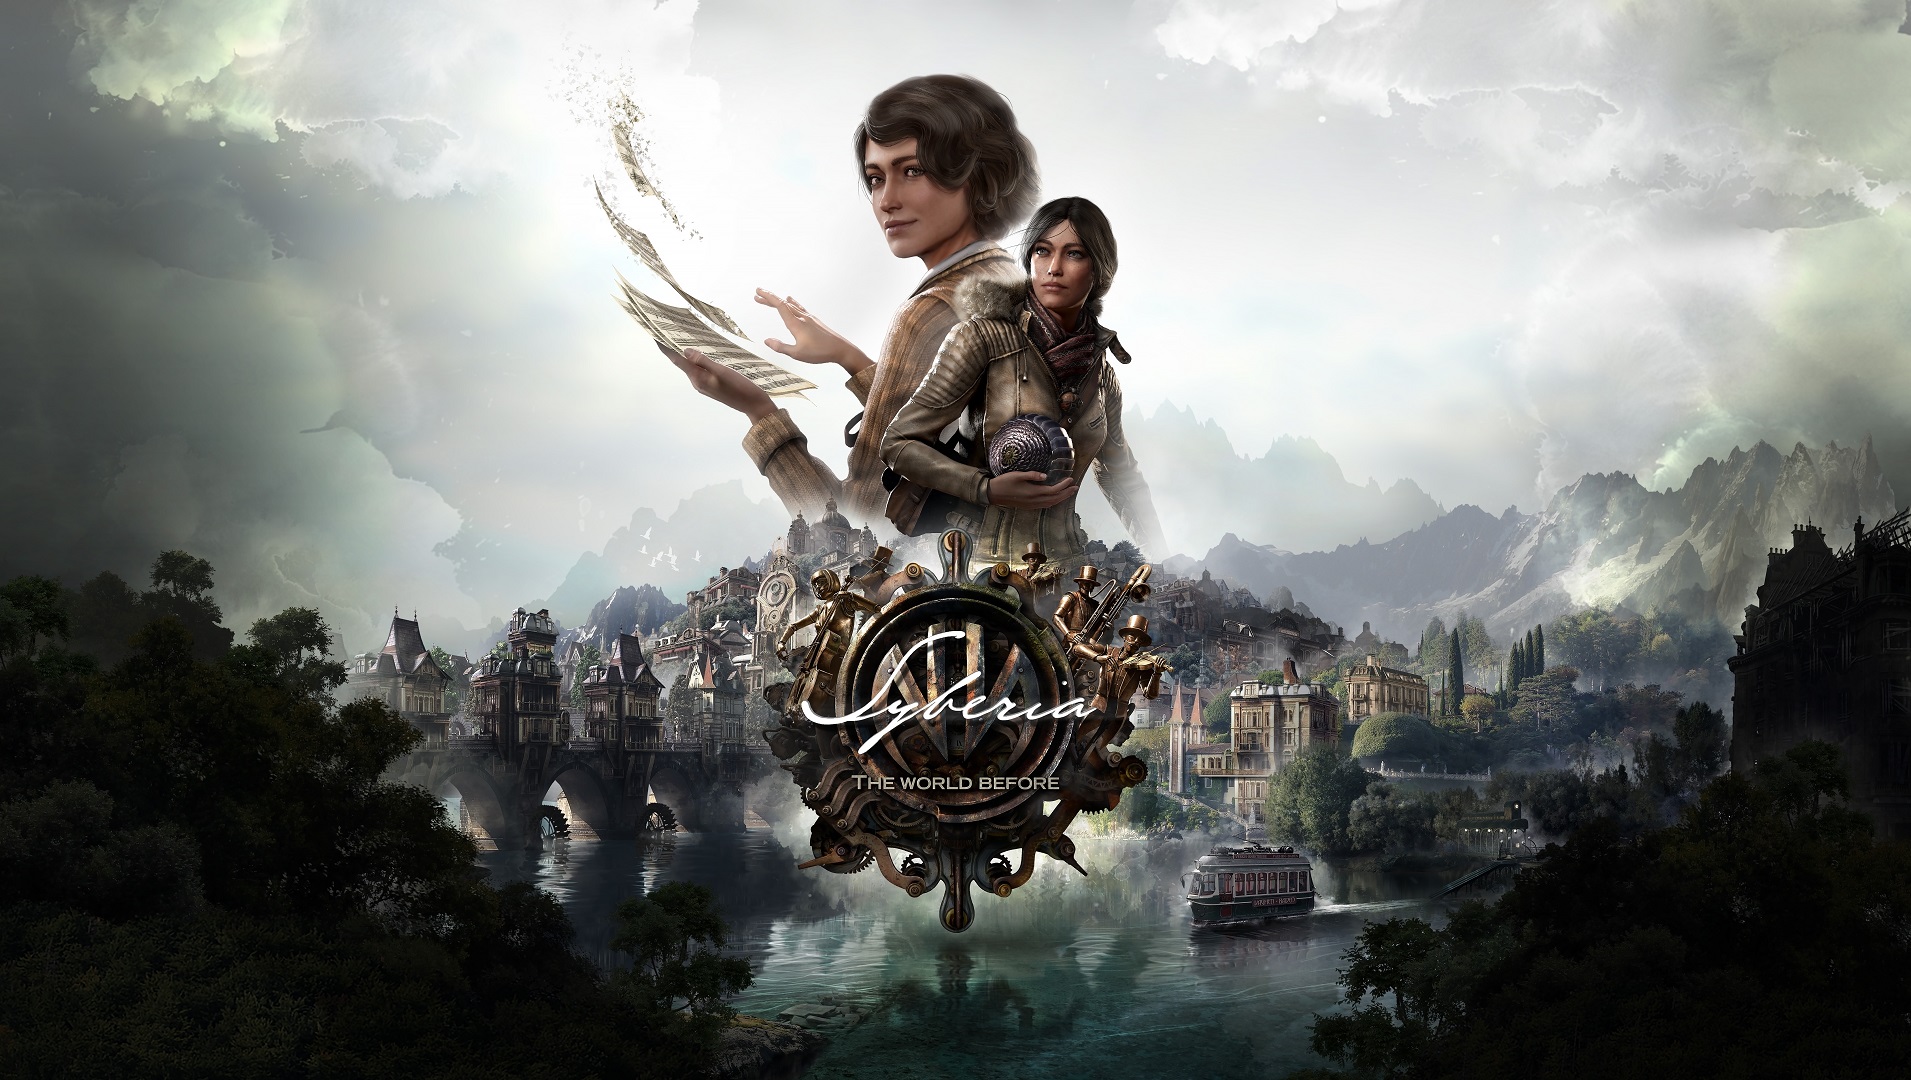 Syberia The World Before 08 19 21 1